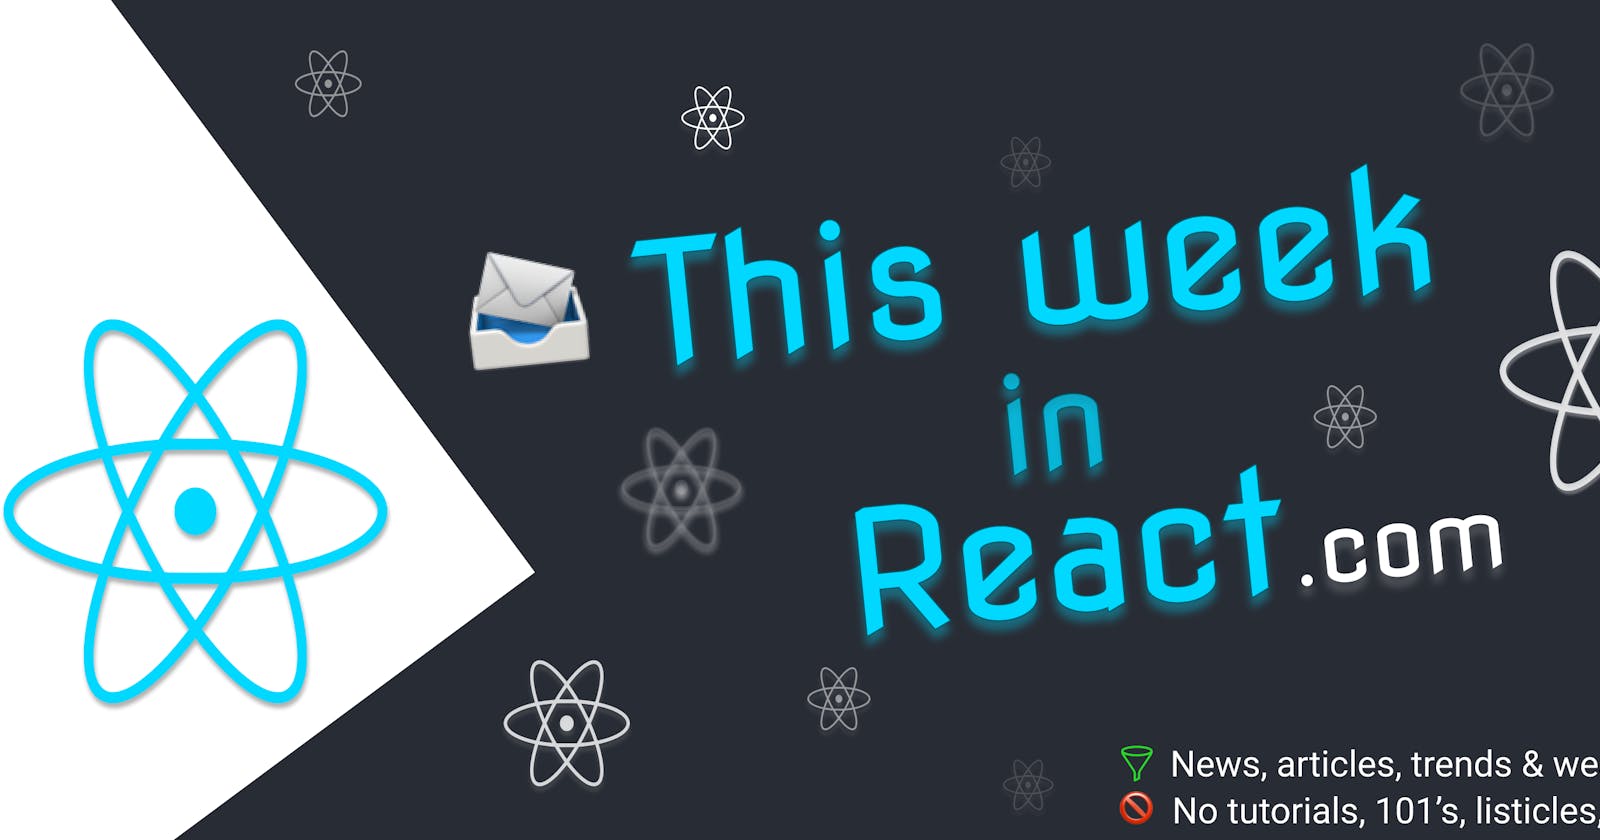 This Week In React #105: useEvent, Next.js Layouts, Remix, Storybook, Reanimated 3, Expo 45, Tamagui, TypeScript, Markdoc...